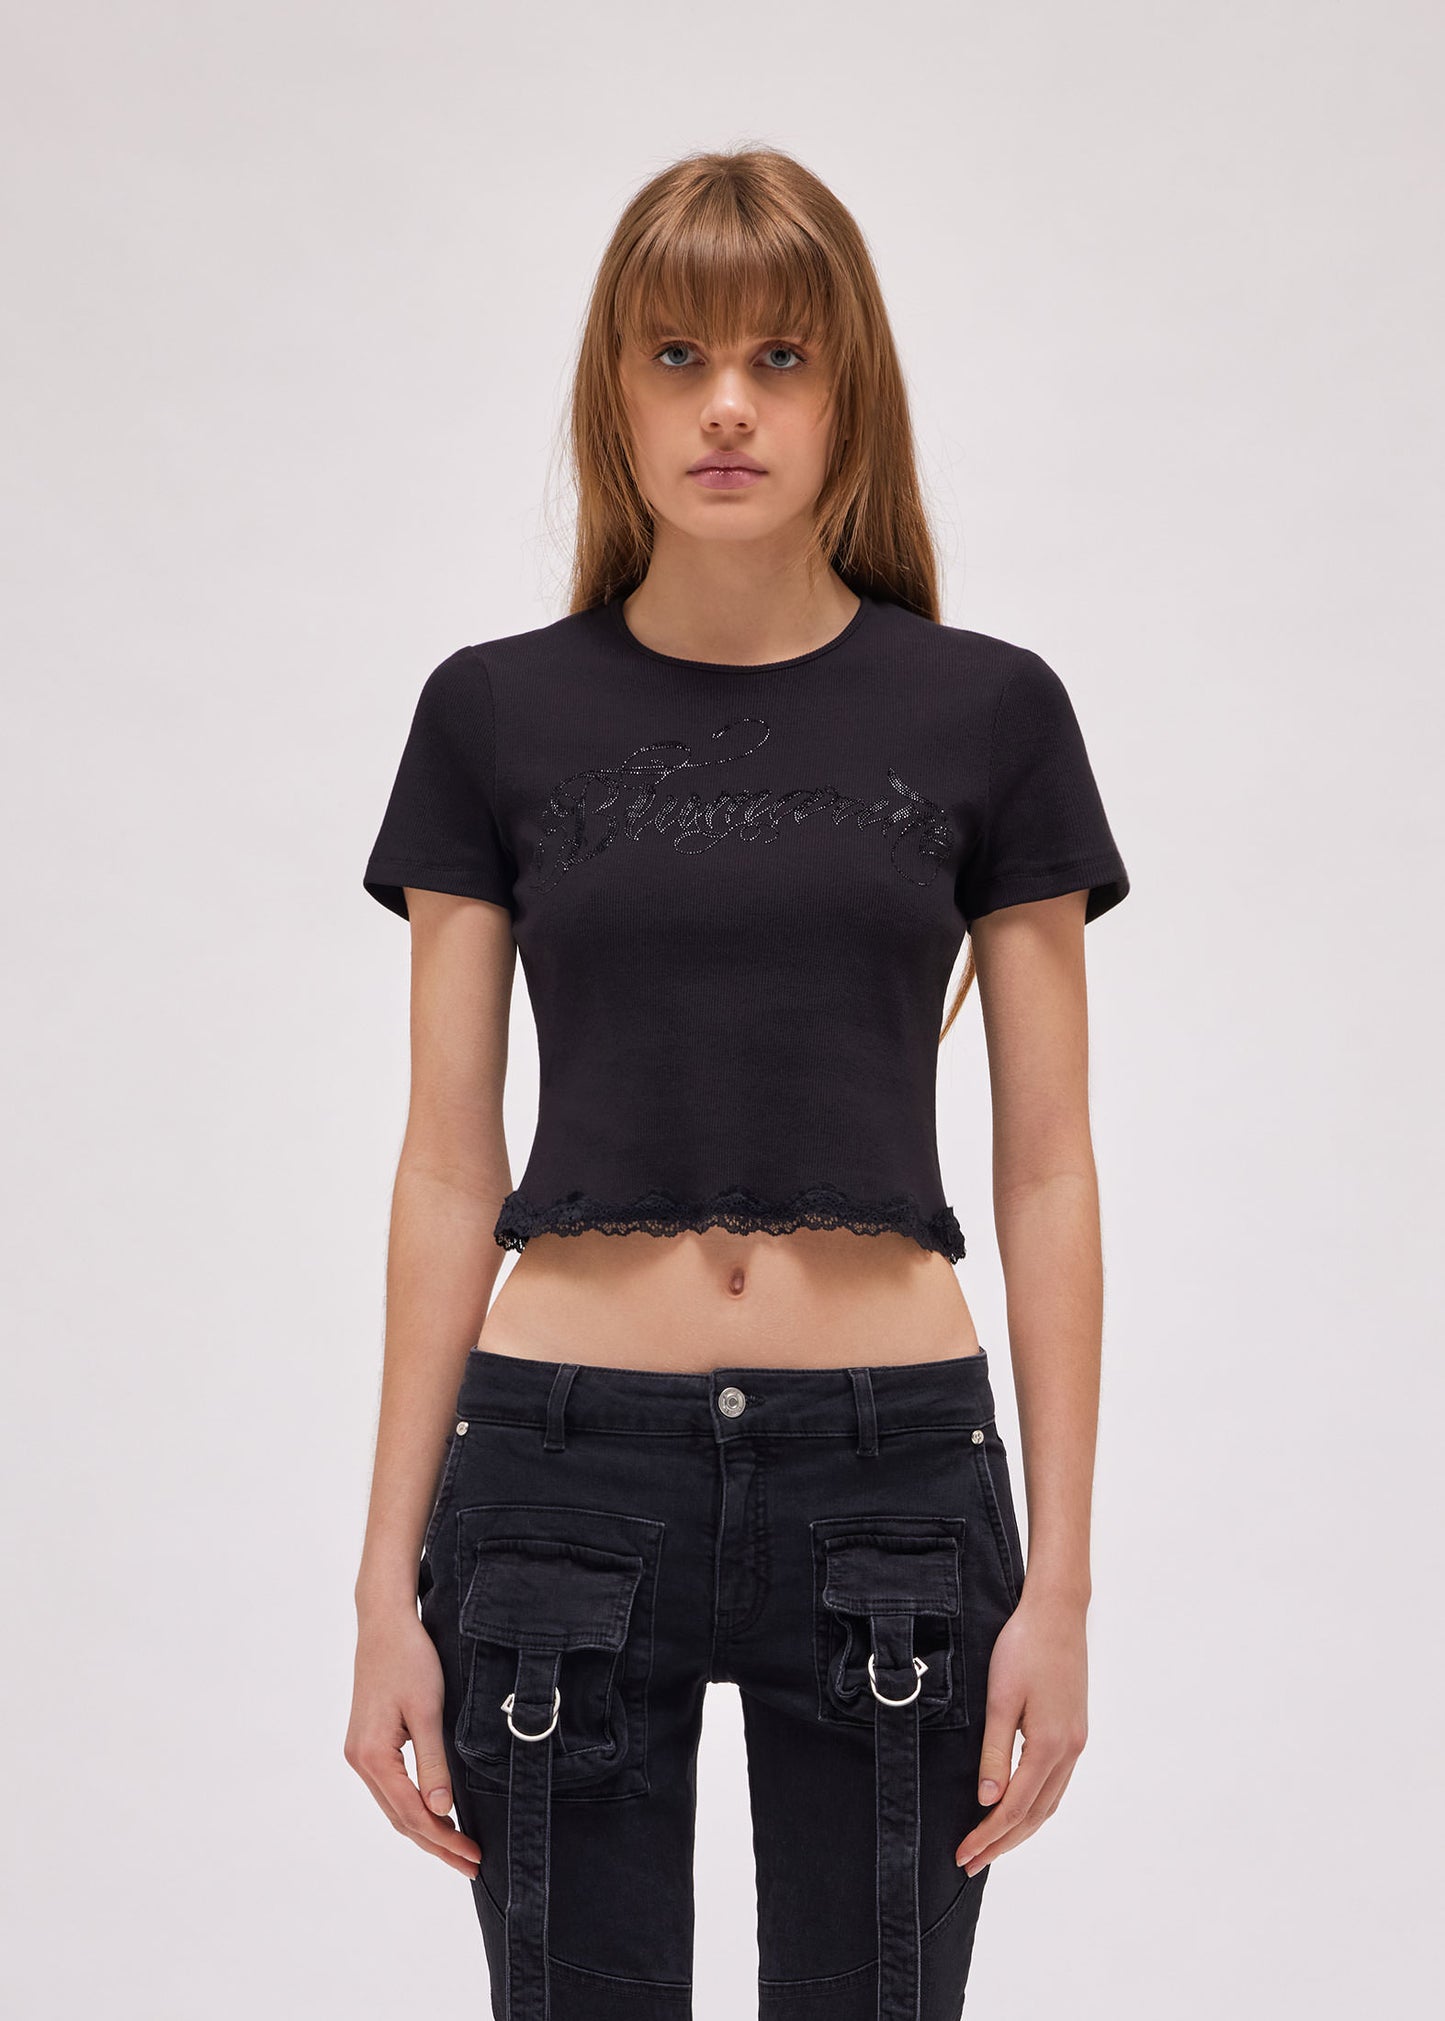 T-SHIRT WITH LOGO AND LACE